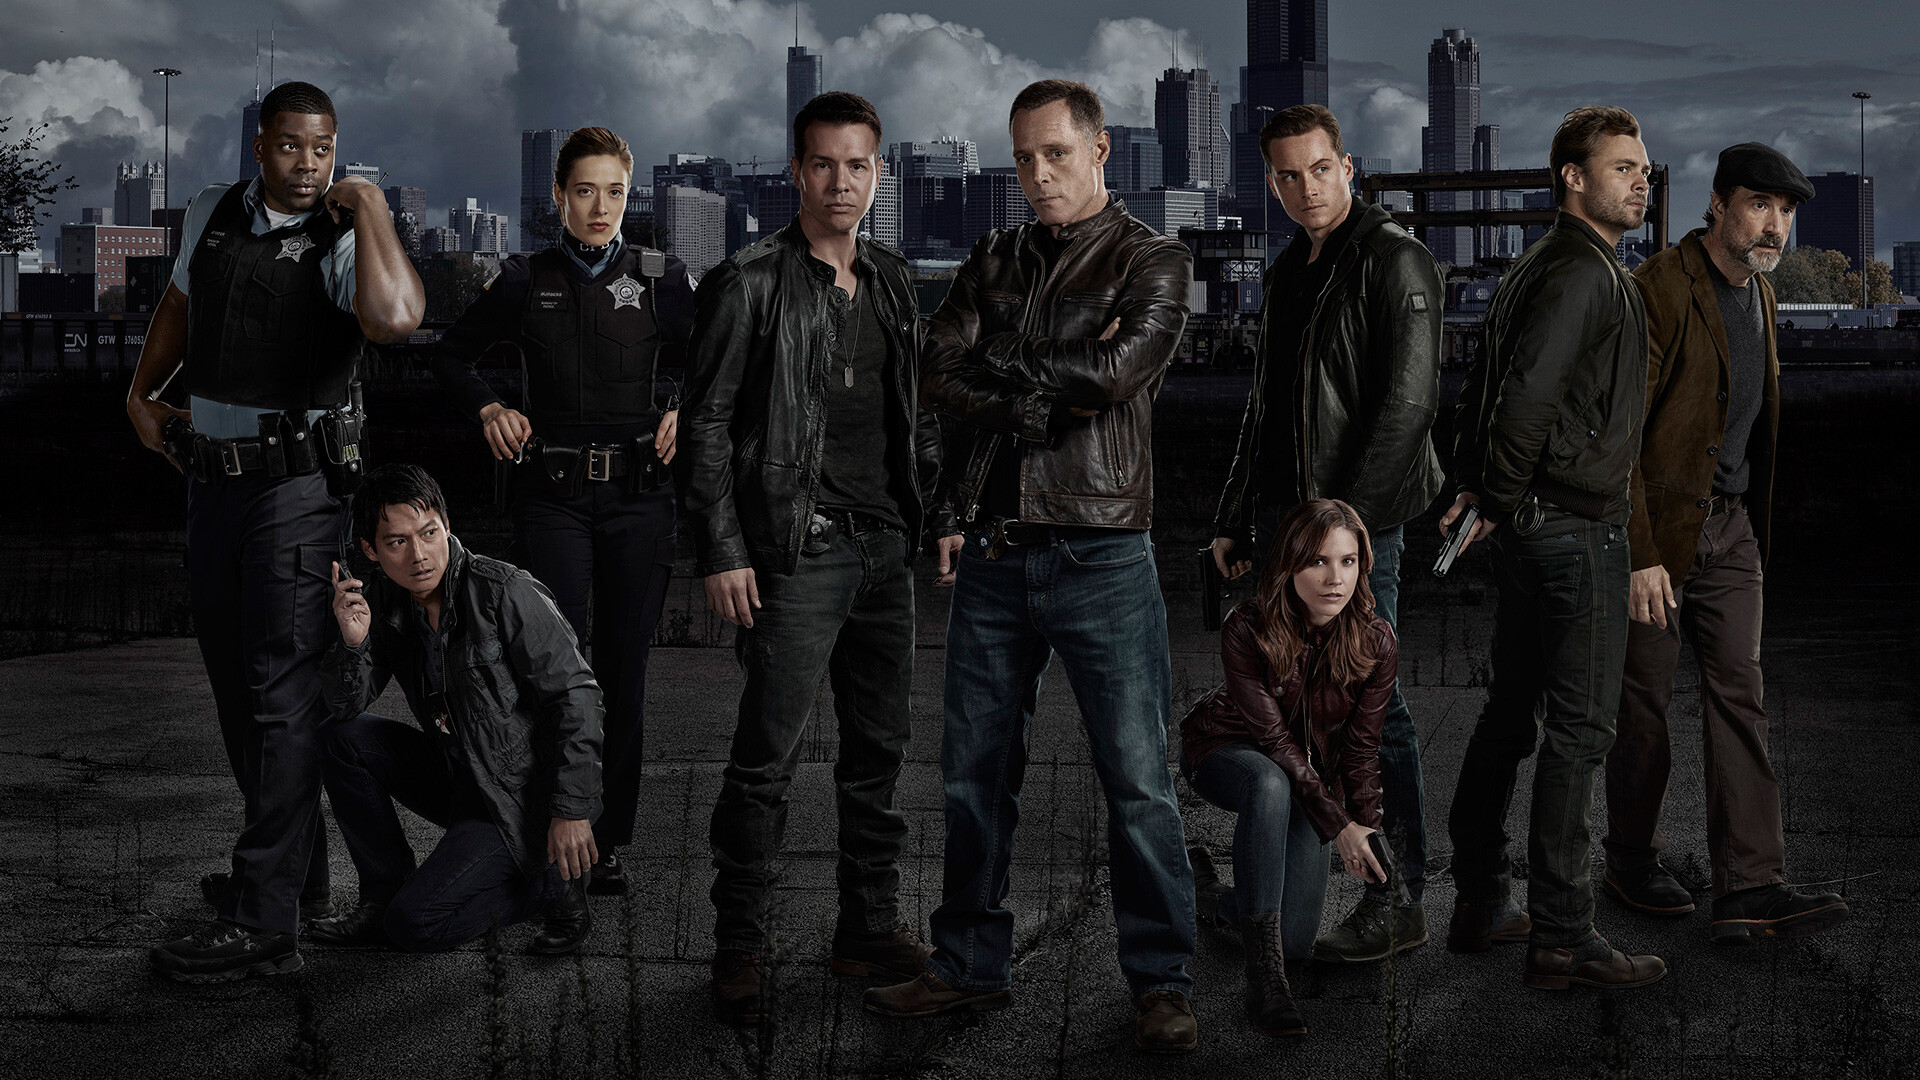 Chicago P.D. (TV Series): Police Crime Drama, The Main Cast, Fictional Characters, Jason Beghe As Henry Voight. 1920x1080 Full HD Background.